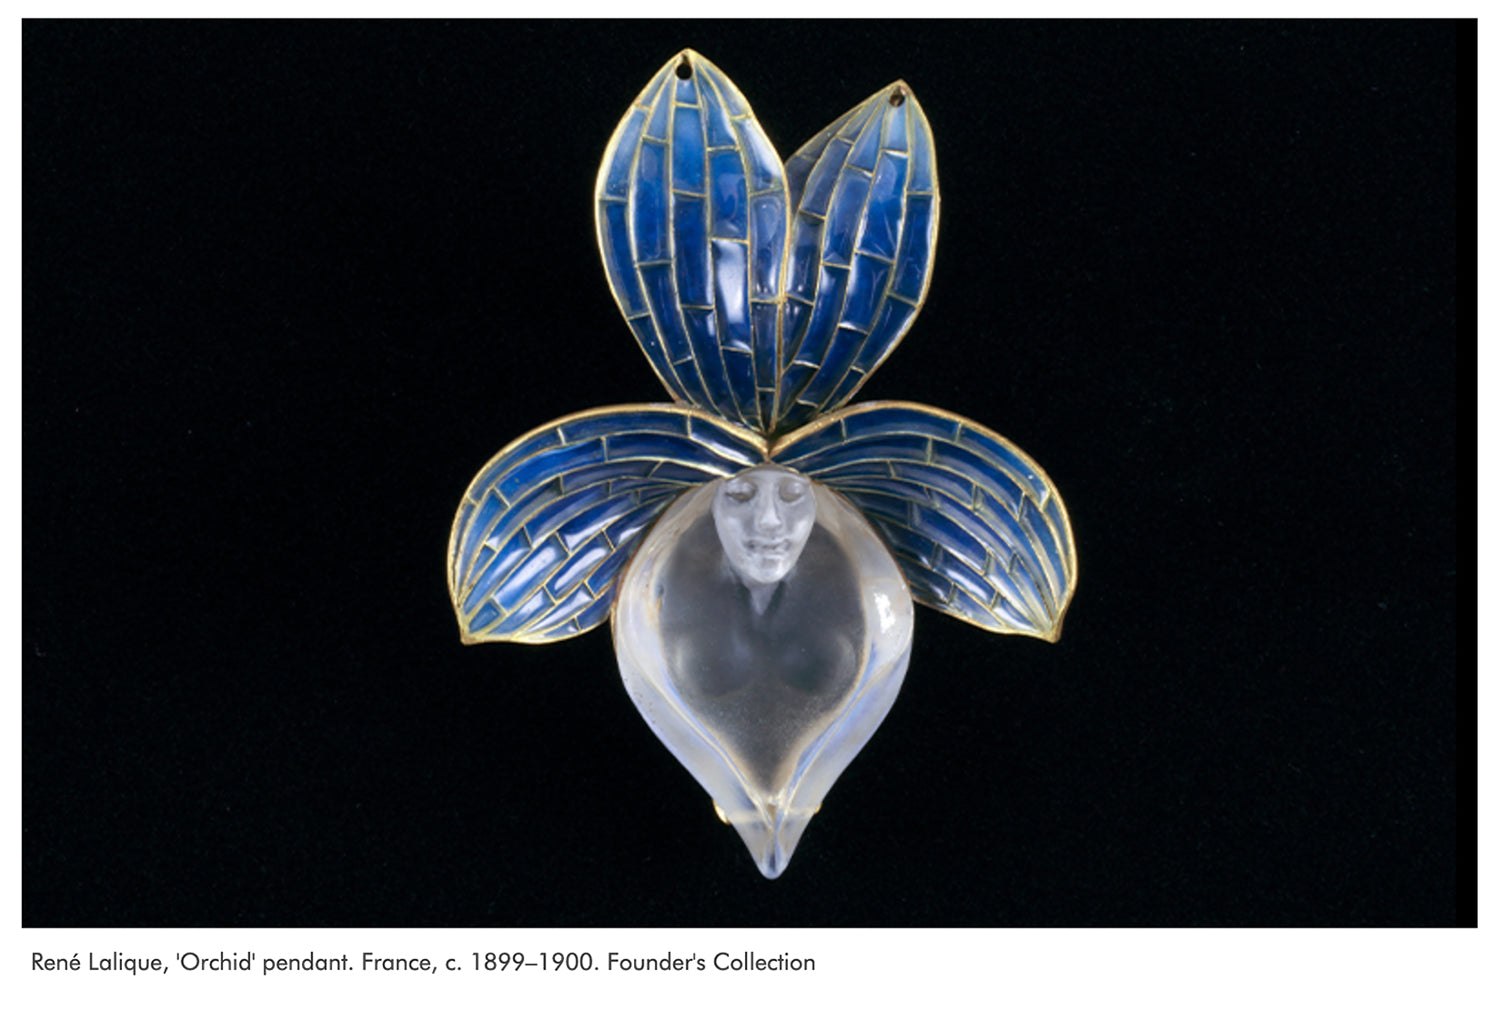 rene-lalique-and-the-woman-flower